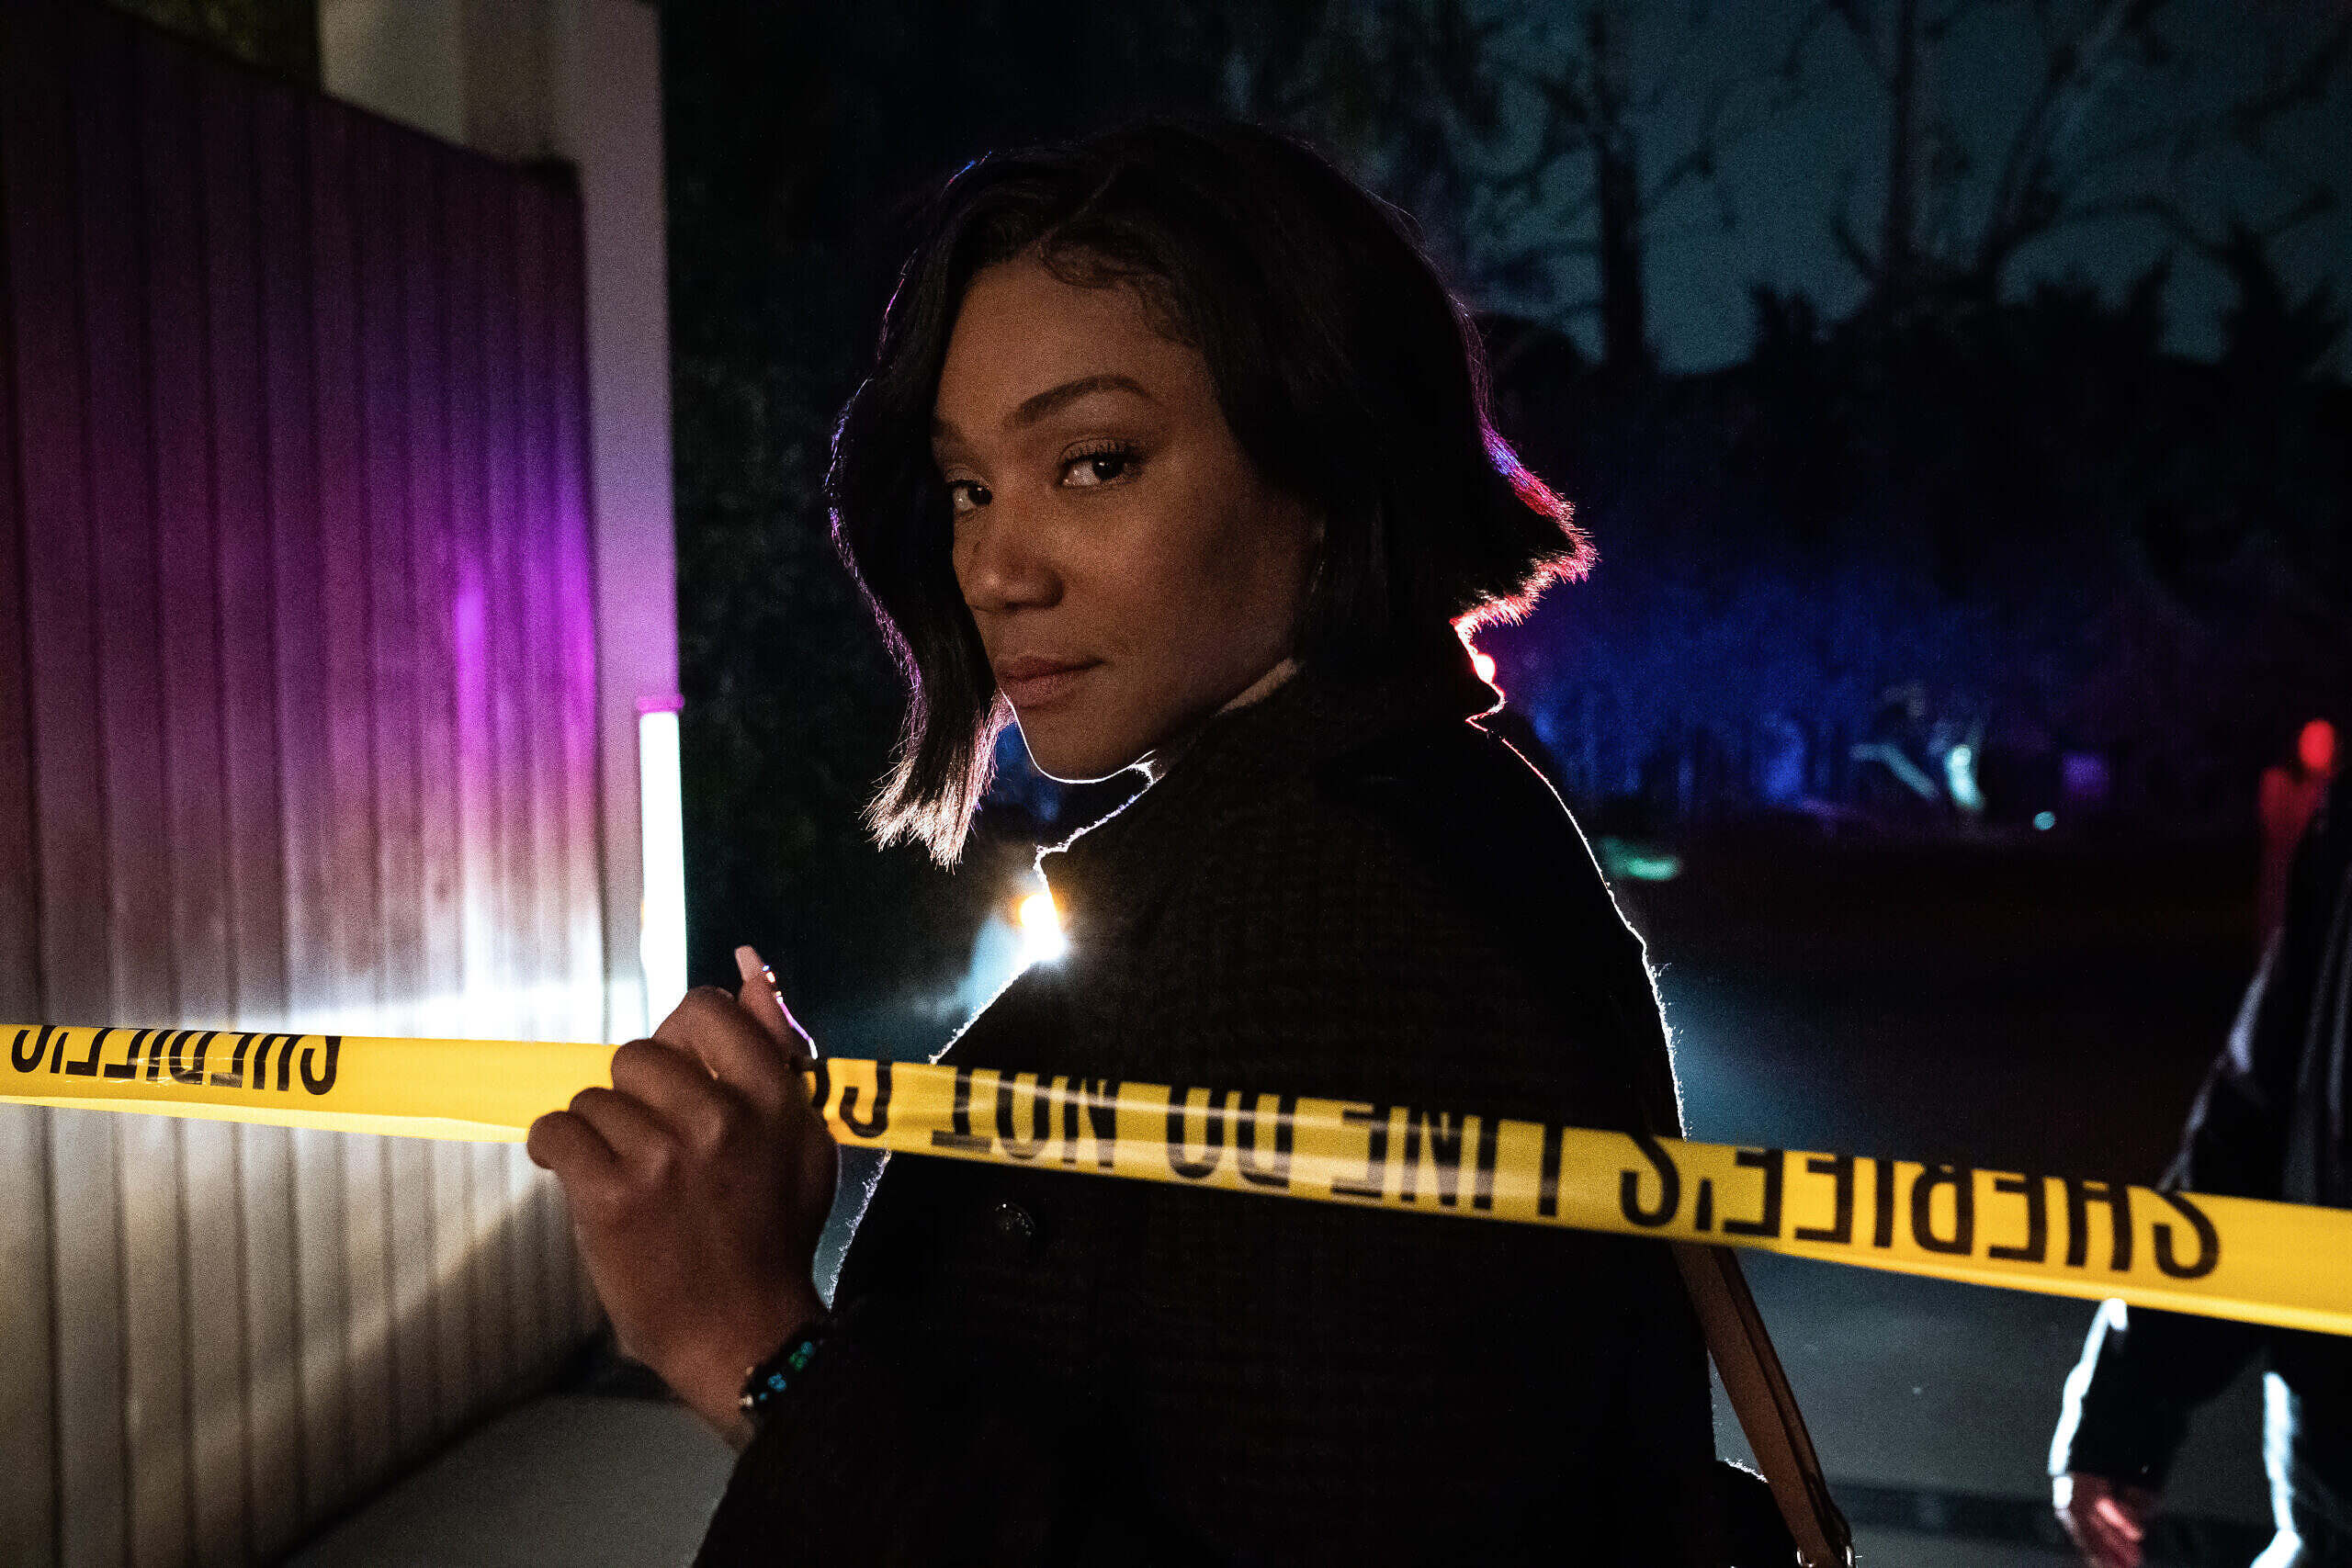 Teaser Trailer For Apple TV+ Original Series 'The Afterparty' Starring Tiffany Haddish